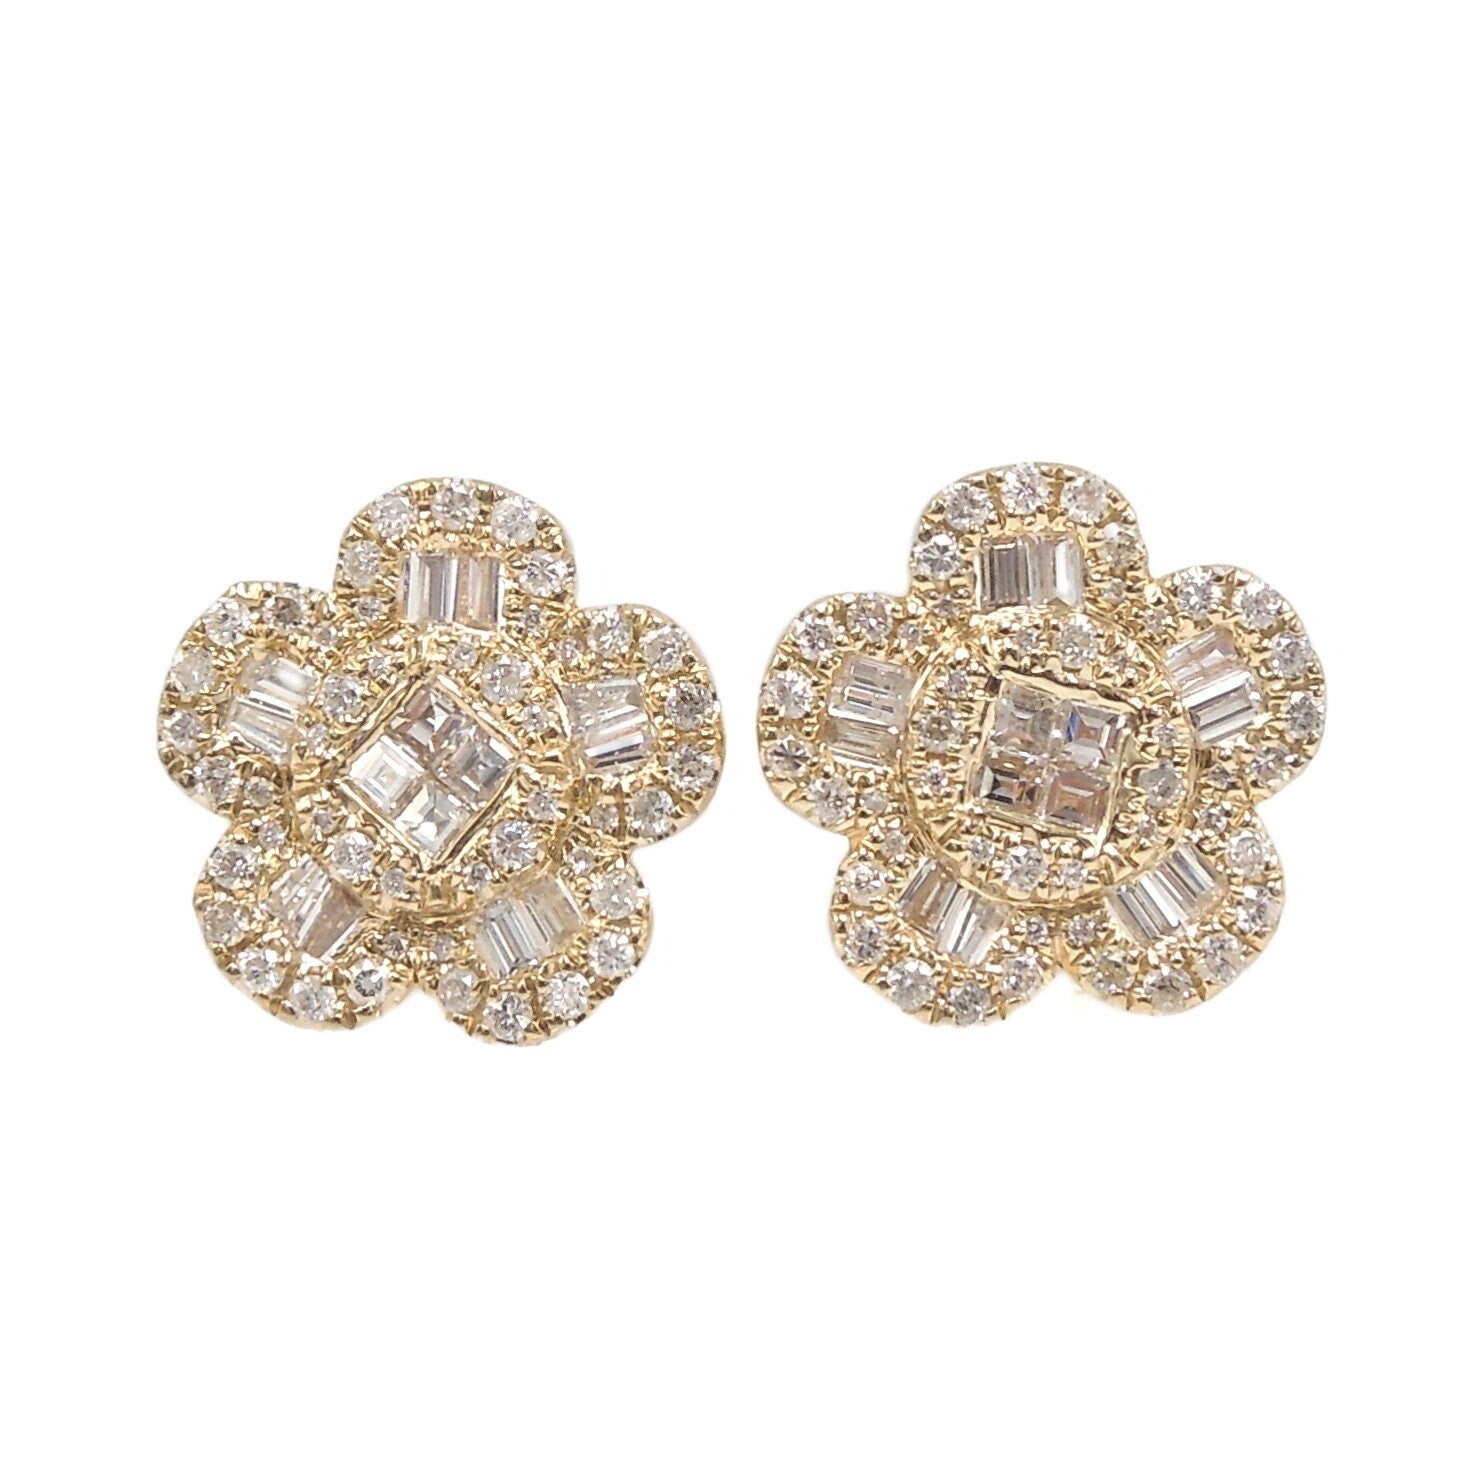 Yellow Gold and Baguette, Round, and Square Diamond Flower Earrings